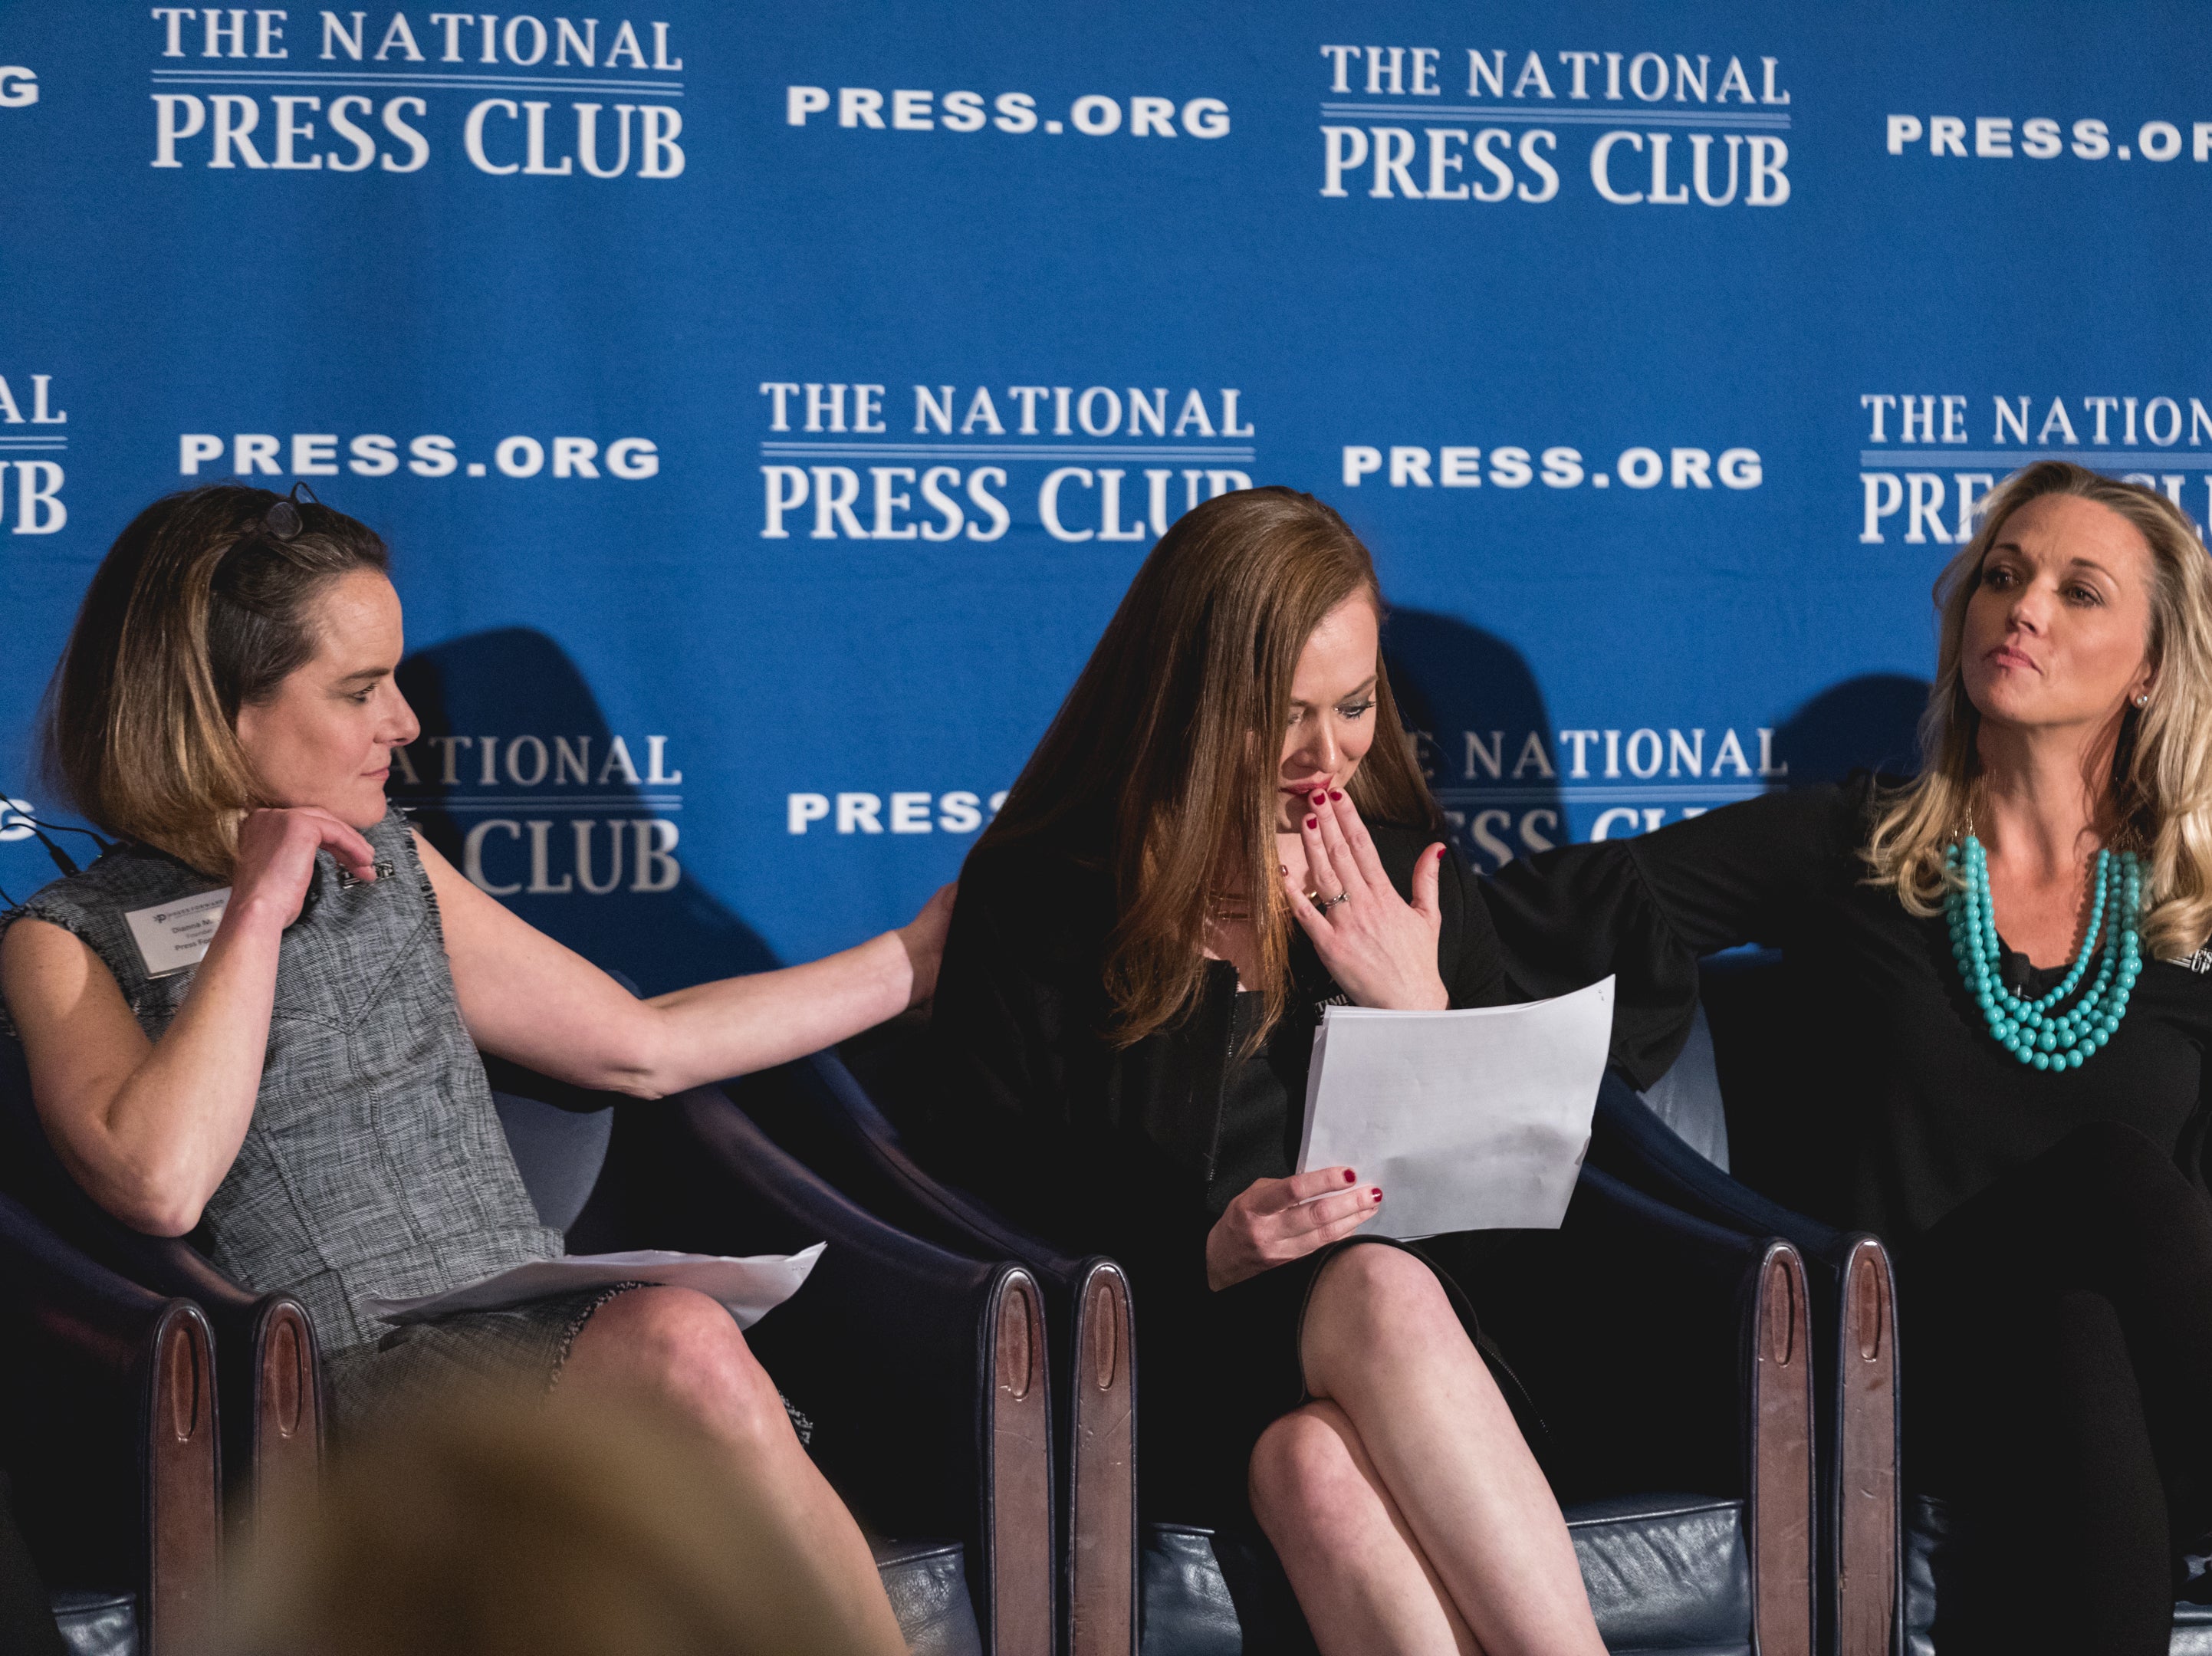 Carolyn McGourty (center) tells her story of sexual harrassment, as panelists Dianna May (left) and Addie Zinone, show their support, at the Press Forward launch event in March 2018. Press Forward is an initiative created to end sexual harassment and assault and create lasting culture change in American newsrooms.